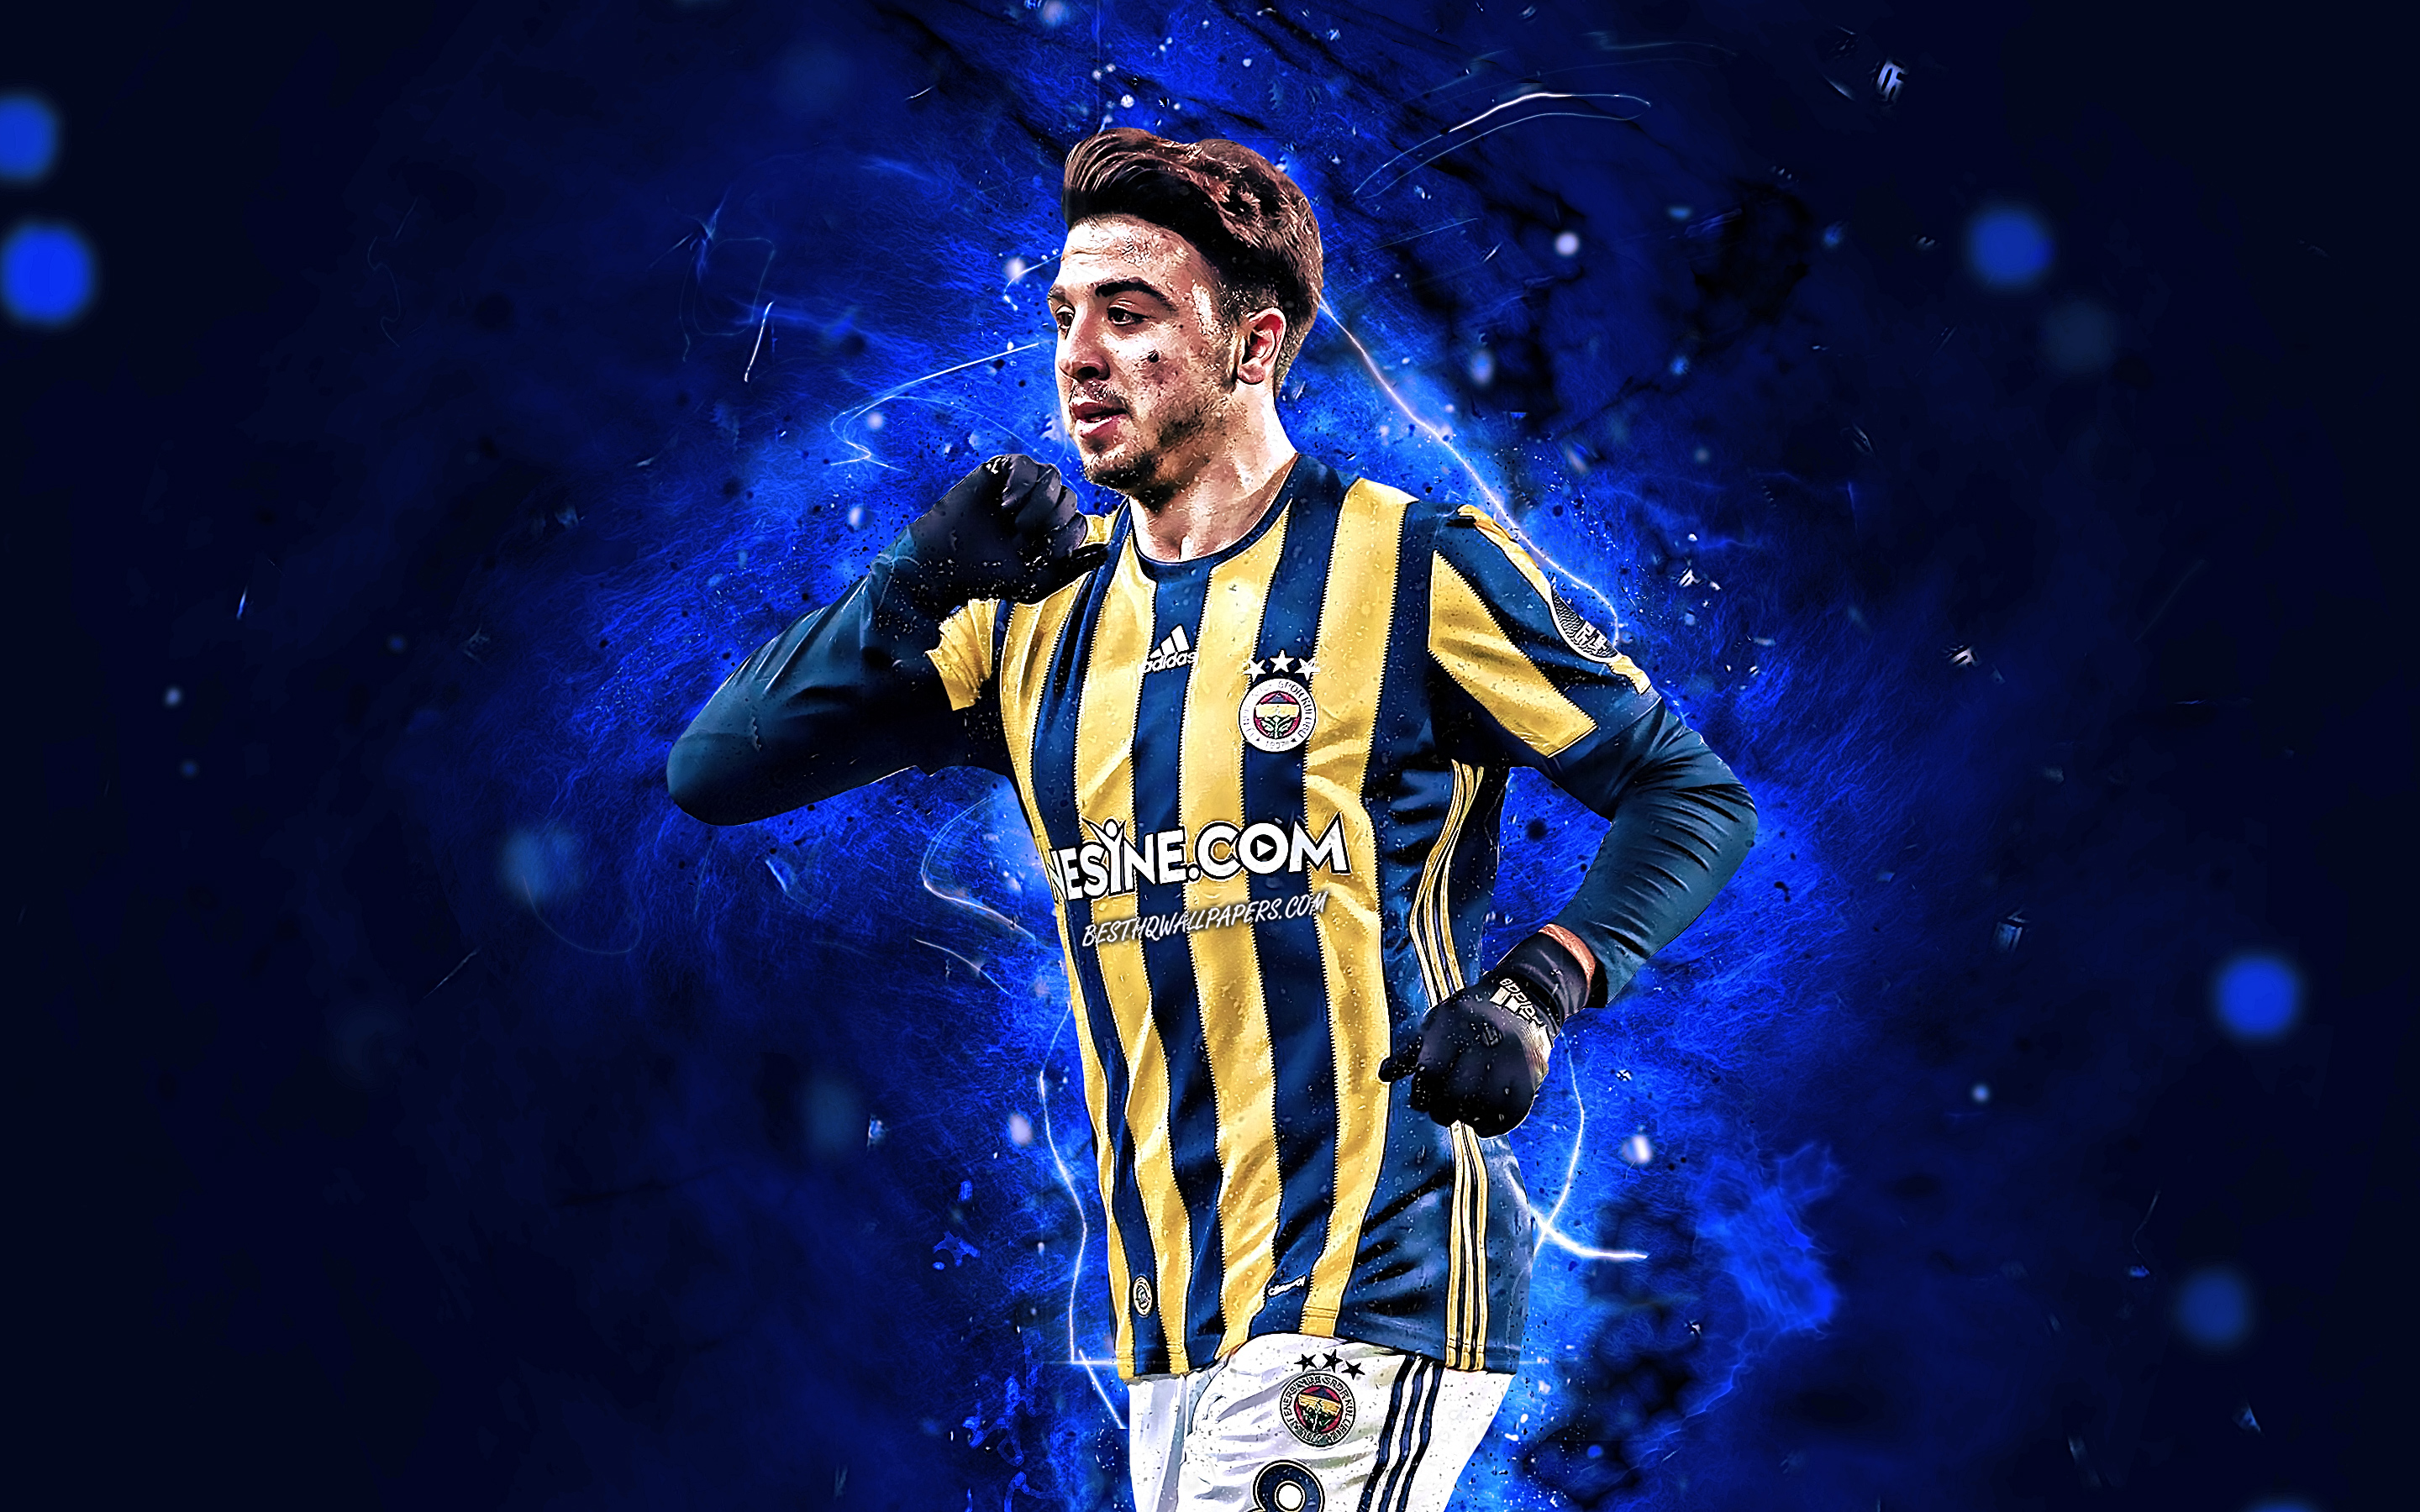 Download wallpaper Ozan Tufan, goal, turkish footballers, Fenerbahce FC, soccer, Tufan, neon lights, abstract art, Turkish Super Lig, creative for desktop with resolution 2880x1800. High Quality HD picture wallpaper